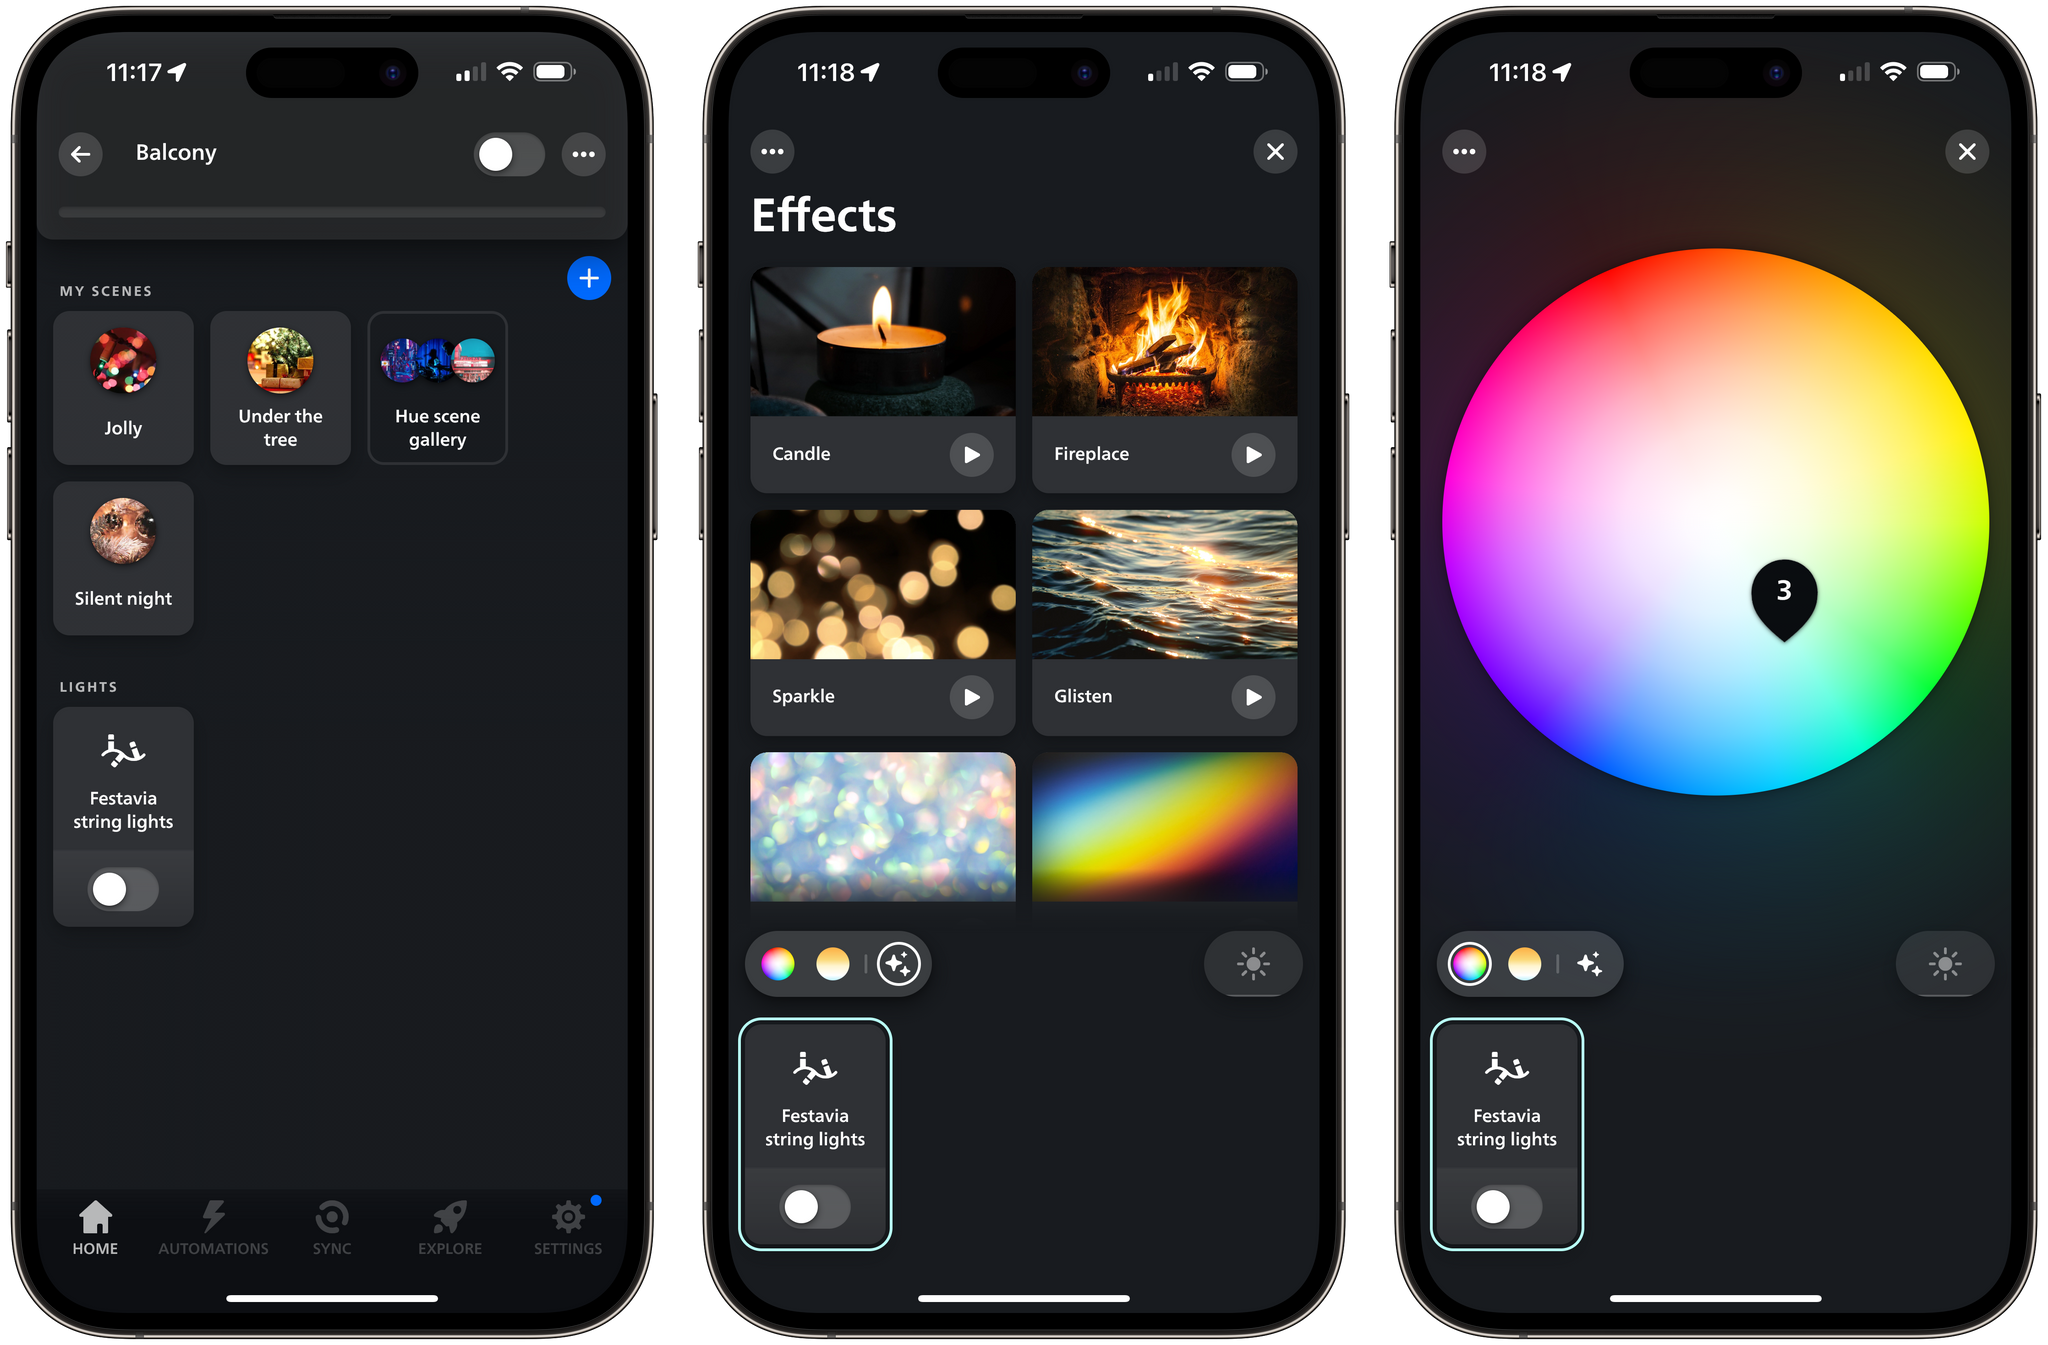 Setting up scenes and effects in the Philips Hue app.